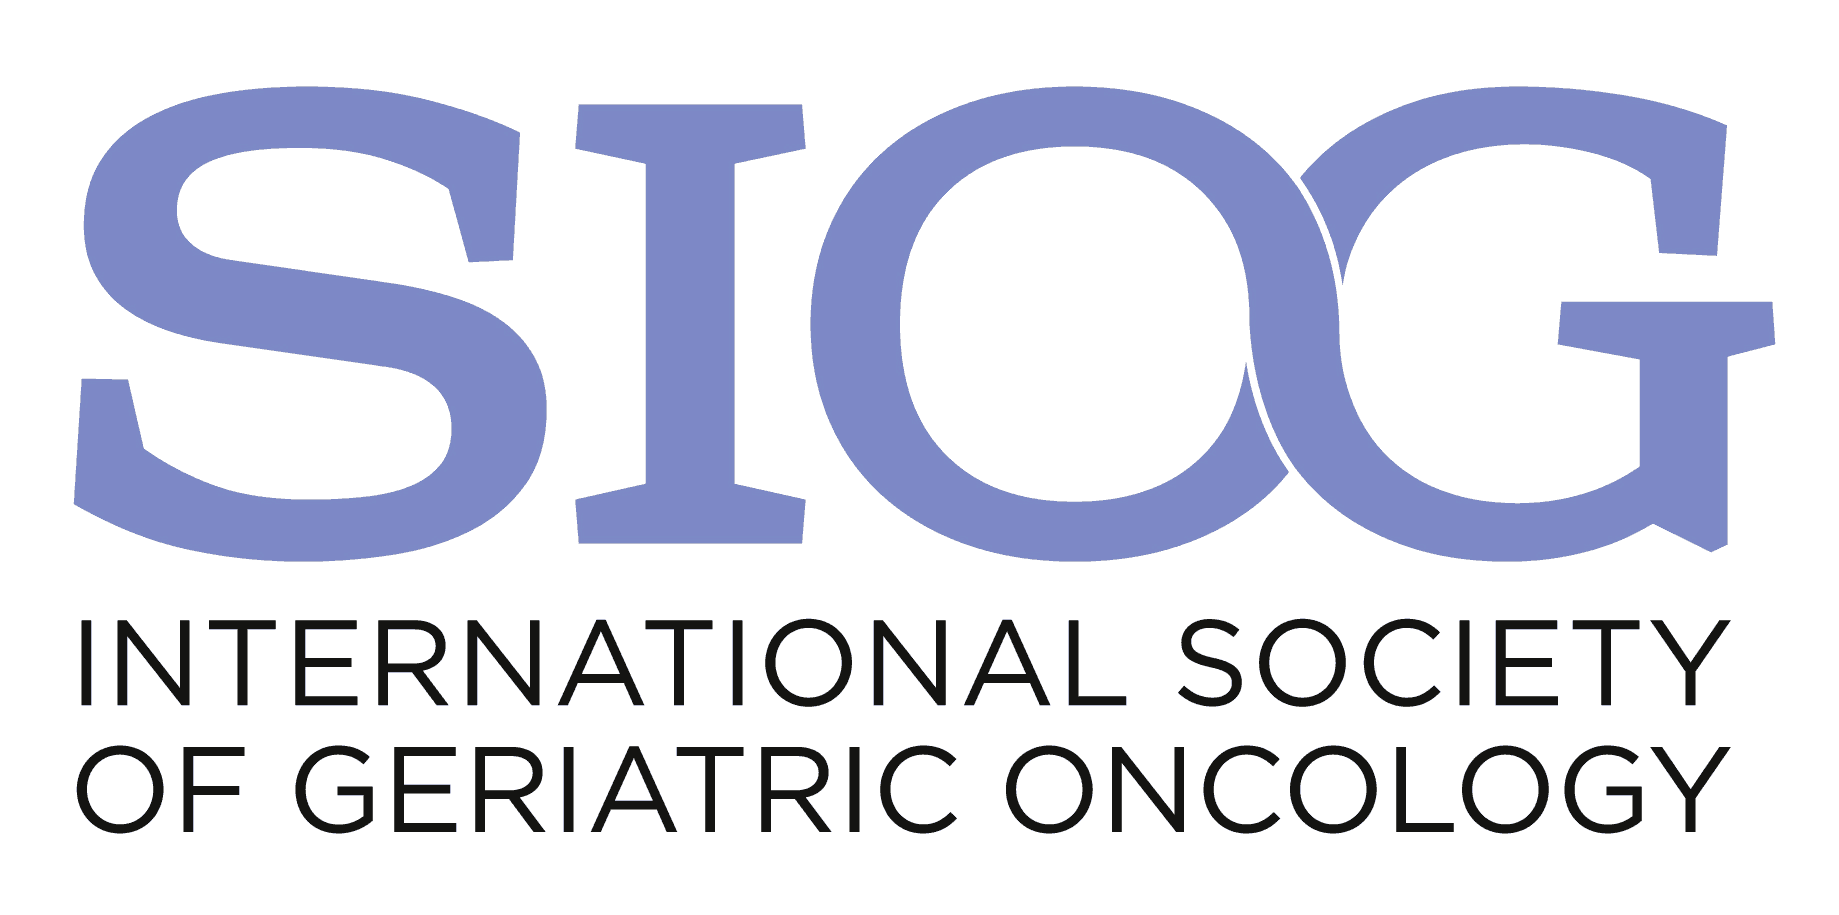 SIOG 2021 - 21st Conference of the International Society of Geriatric Oncology